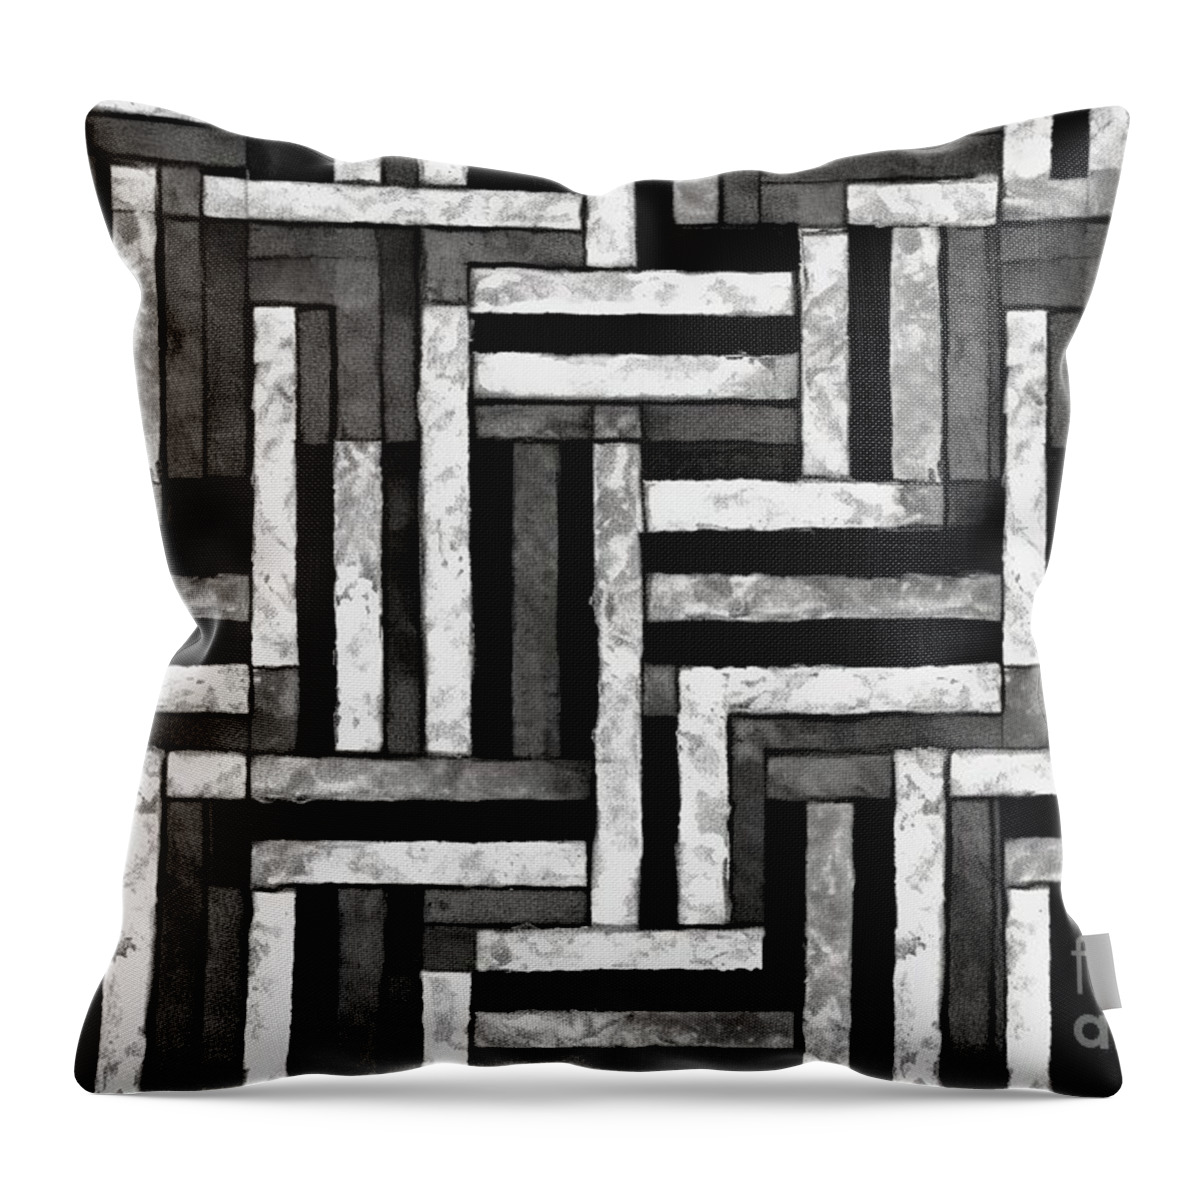 Seamless Throw Pillow featuring the painting Seamless Painted Overlapping Striped Square Tiles Black And White Artistic Acrylic Paint Texture Background Tileable Creative Grunge Monochrome Hand Drawn Geometric Wallpaper Surface Pattern Design #1 by N Akkash